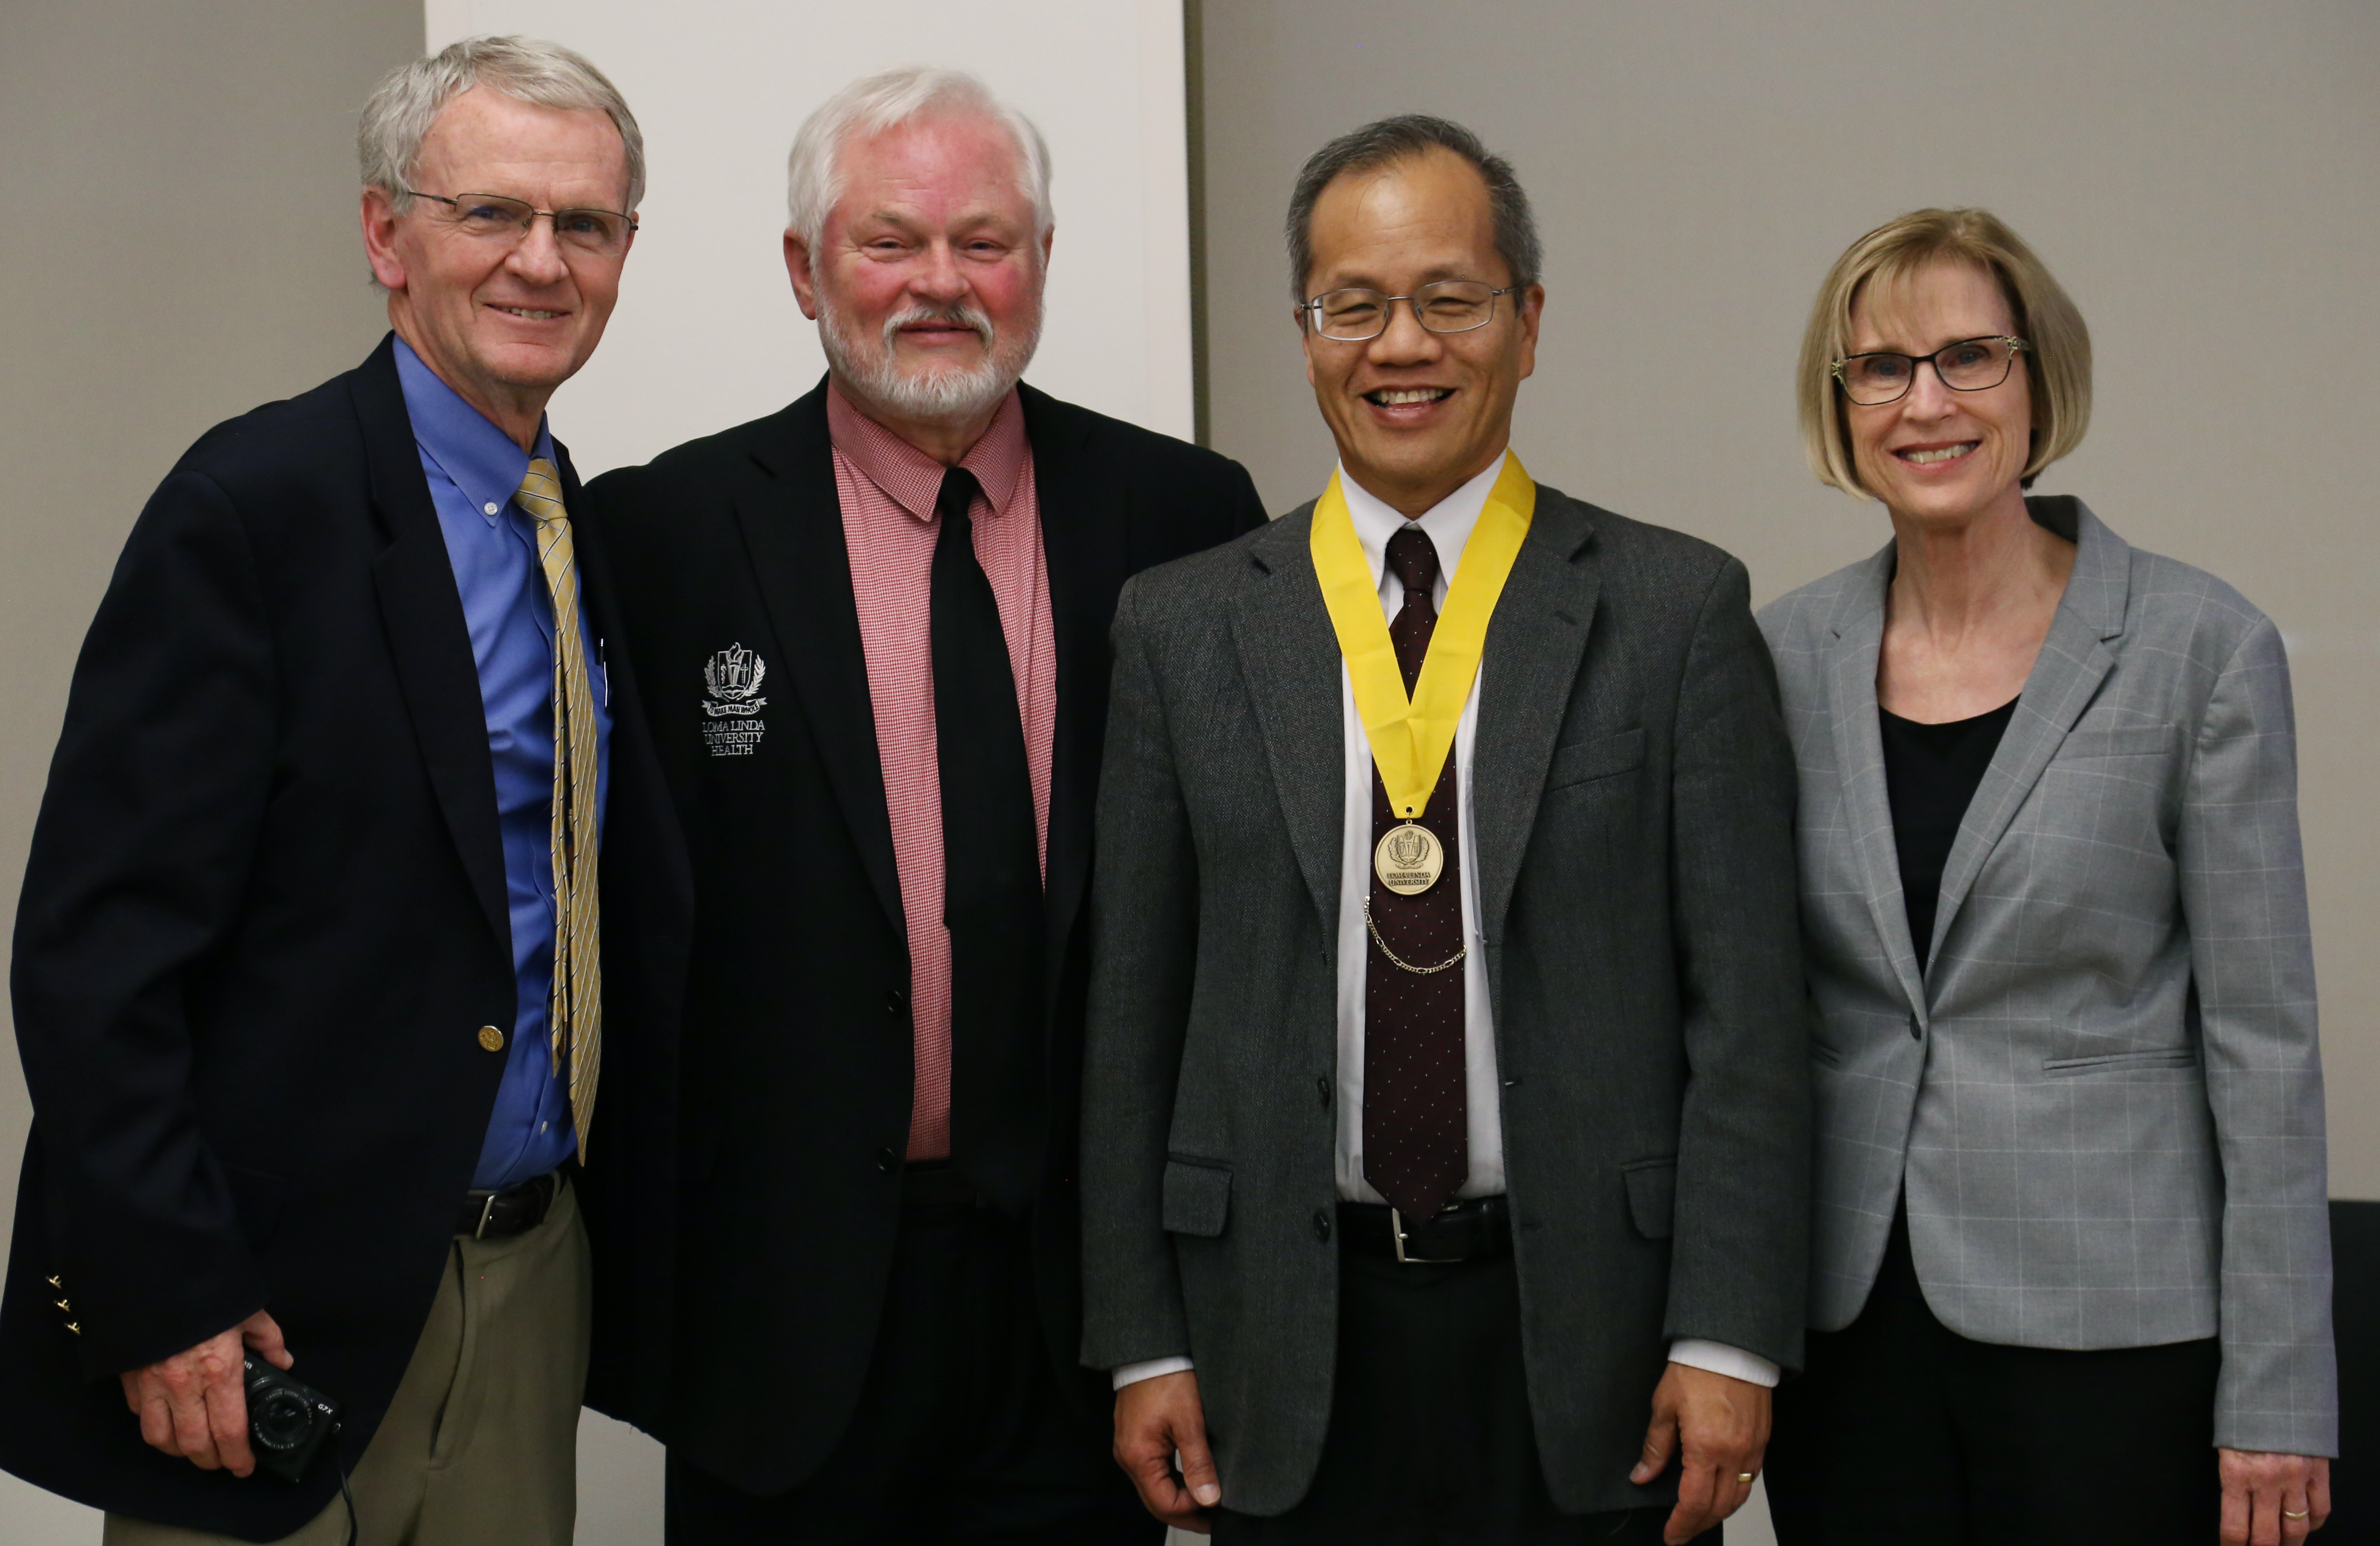 Lawrence Loo, MD, won the Kinzer-Rice award for teaching excellence on February 8, 2018